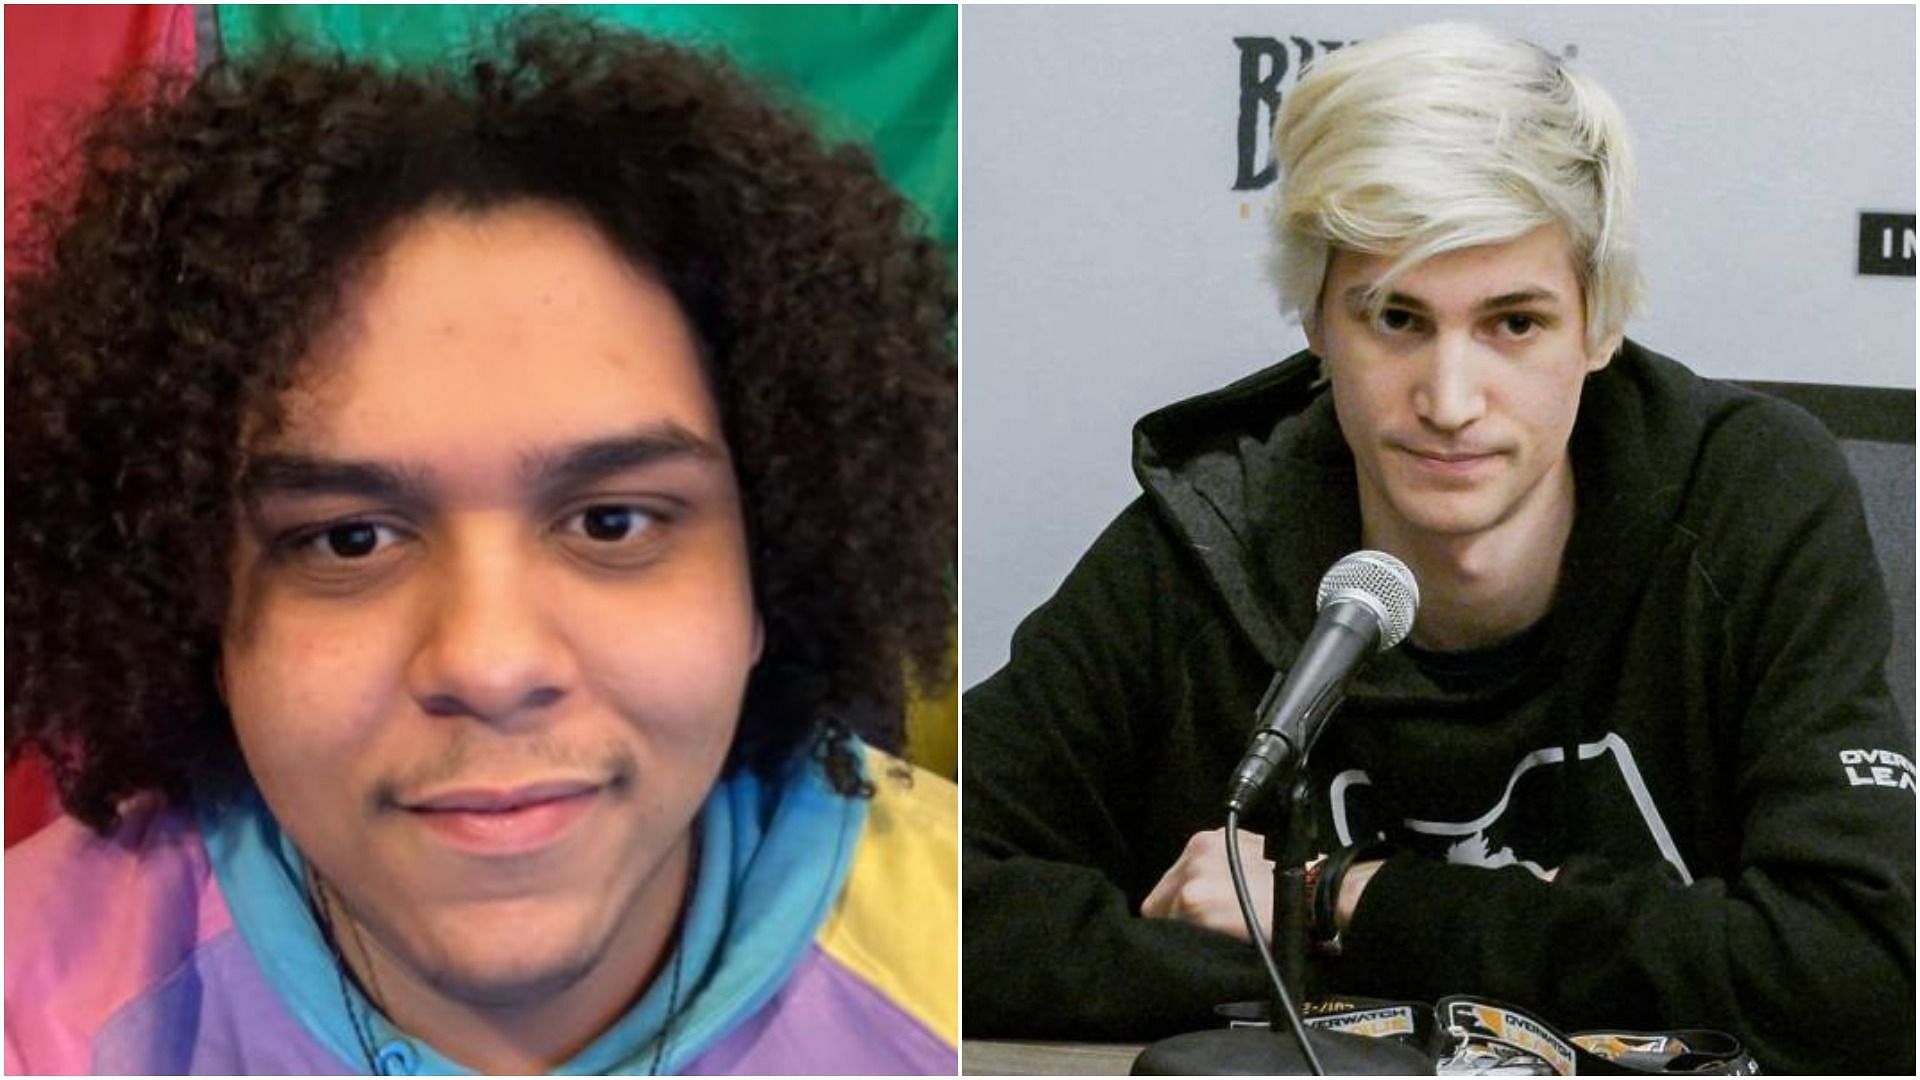 Zoil hits back at xQc for his comments about his size (Image via Twitter and WikiBio)